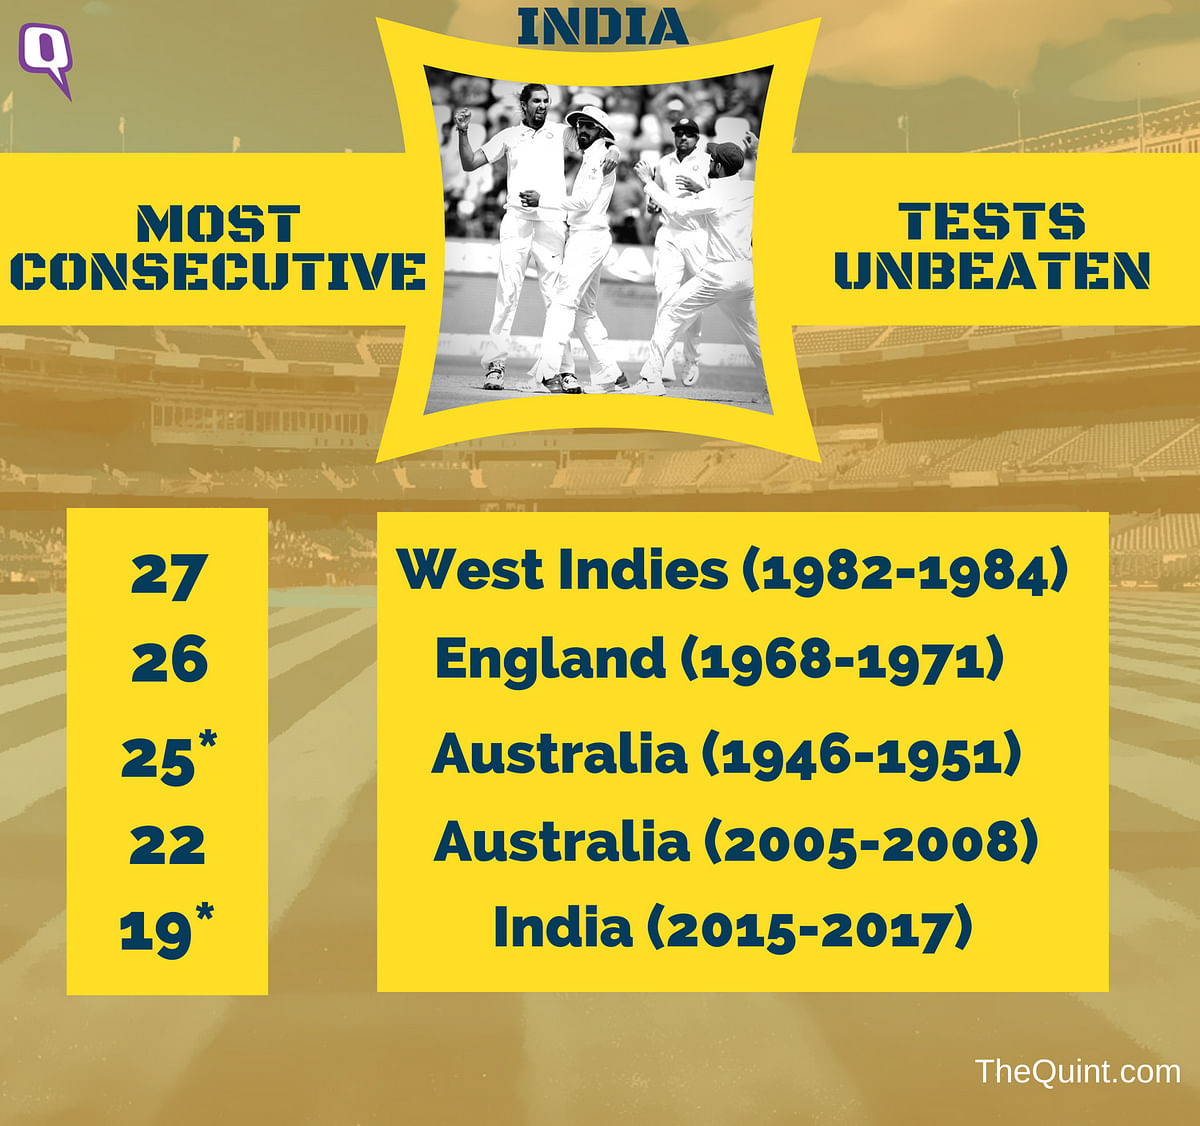 The first time an Indian team has won six Test series on the trot.